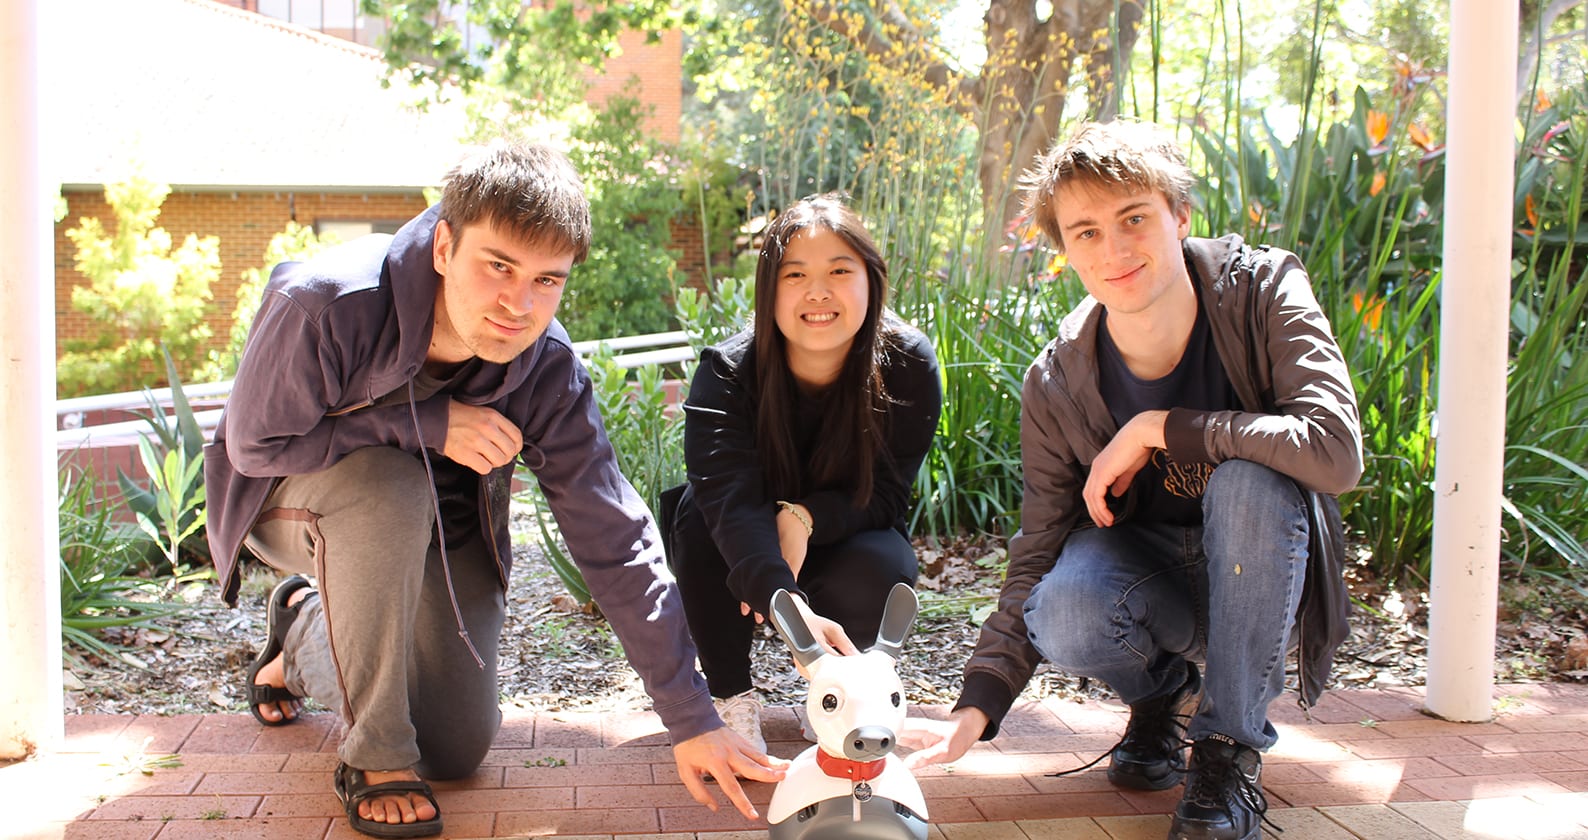 Image for Joint research project to bring pet robot ‘puppy’ to aged care residents